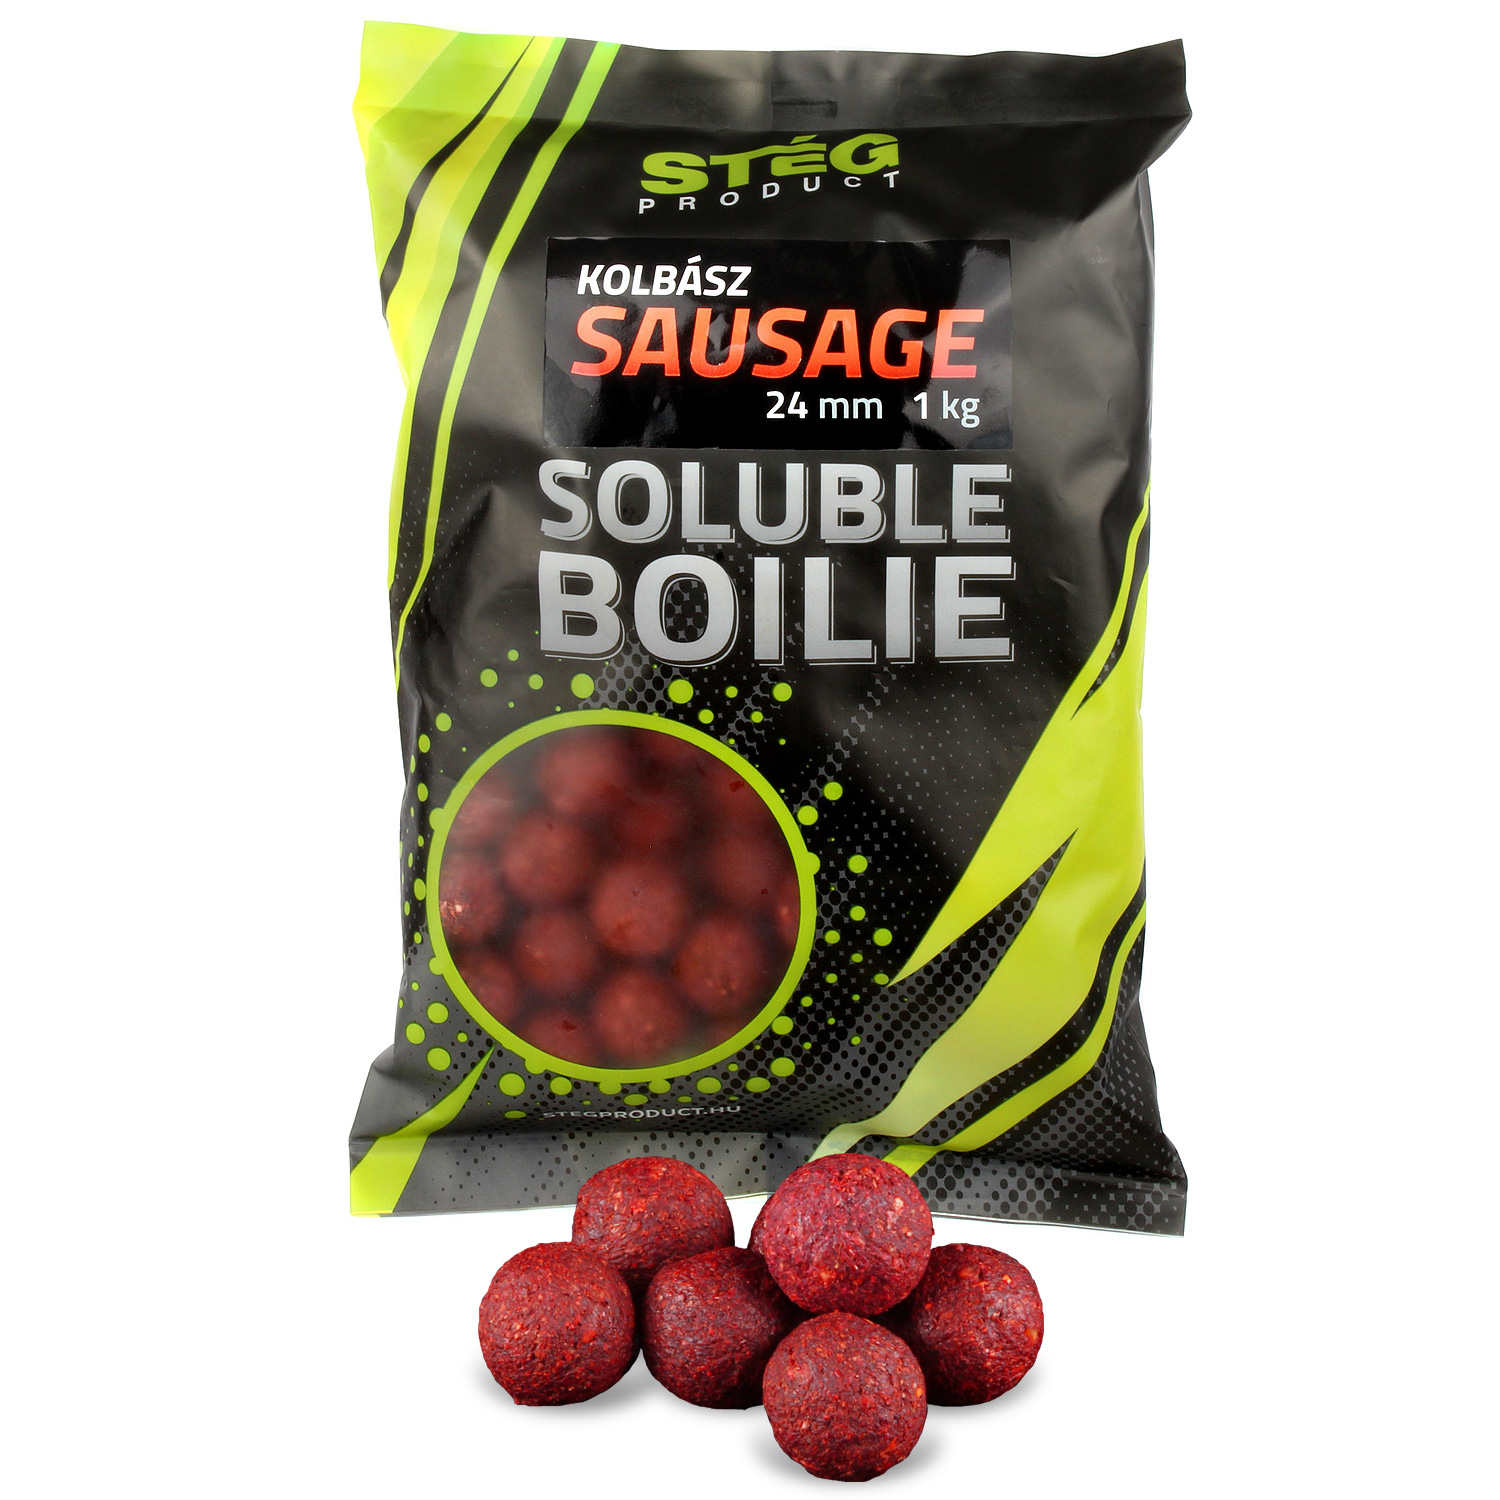 Stg Product Soluble Boilie 20mm Sausage 1kg